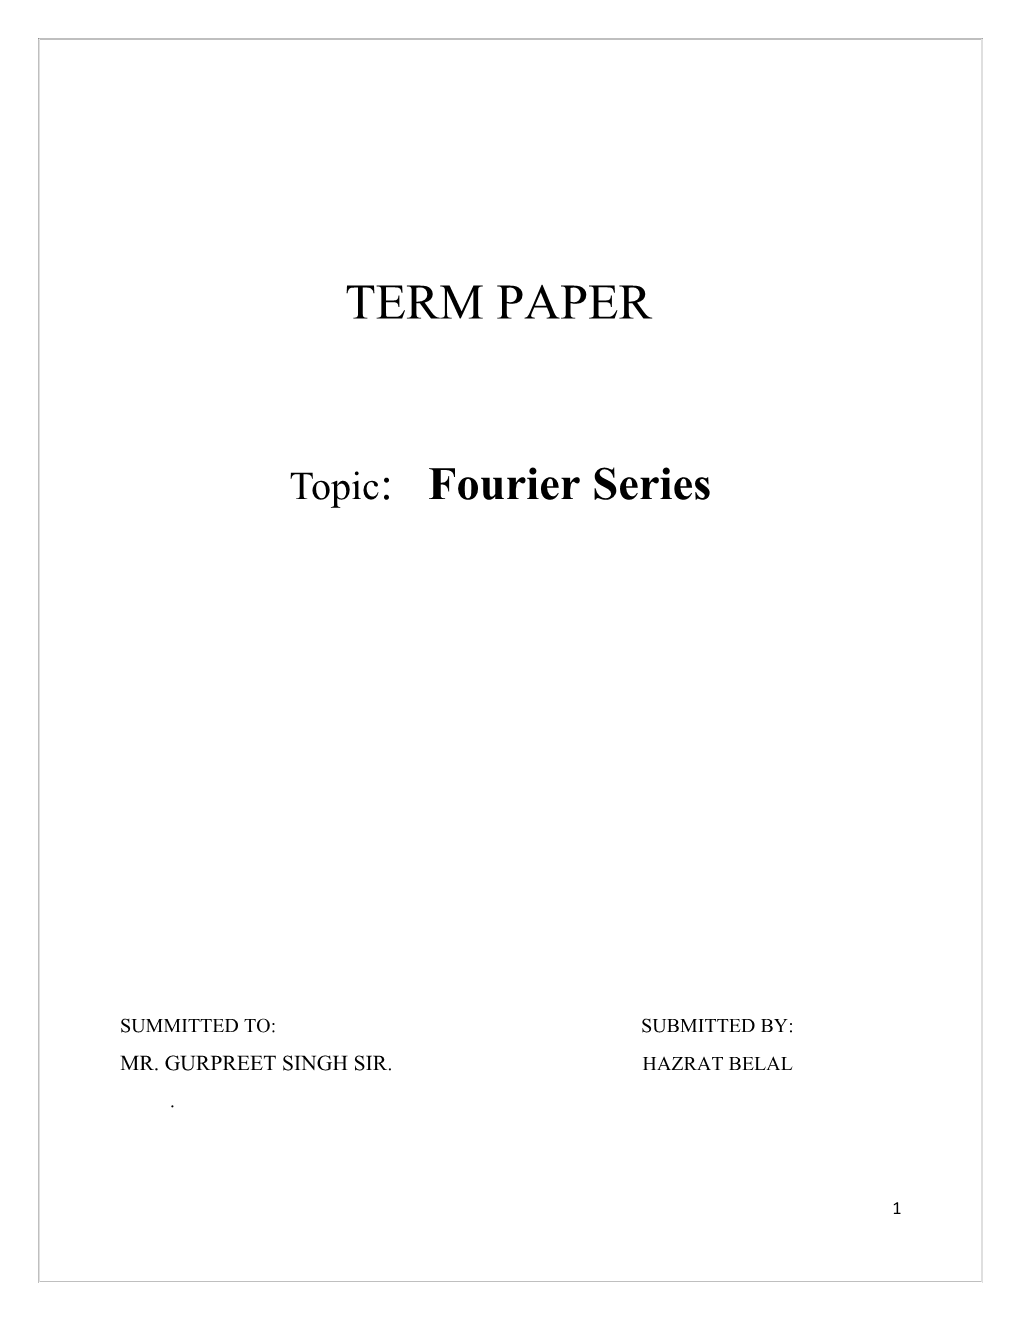 Topic: Fourier Series